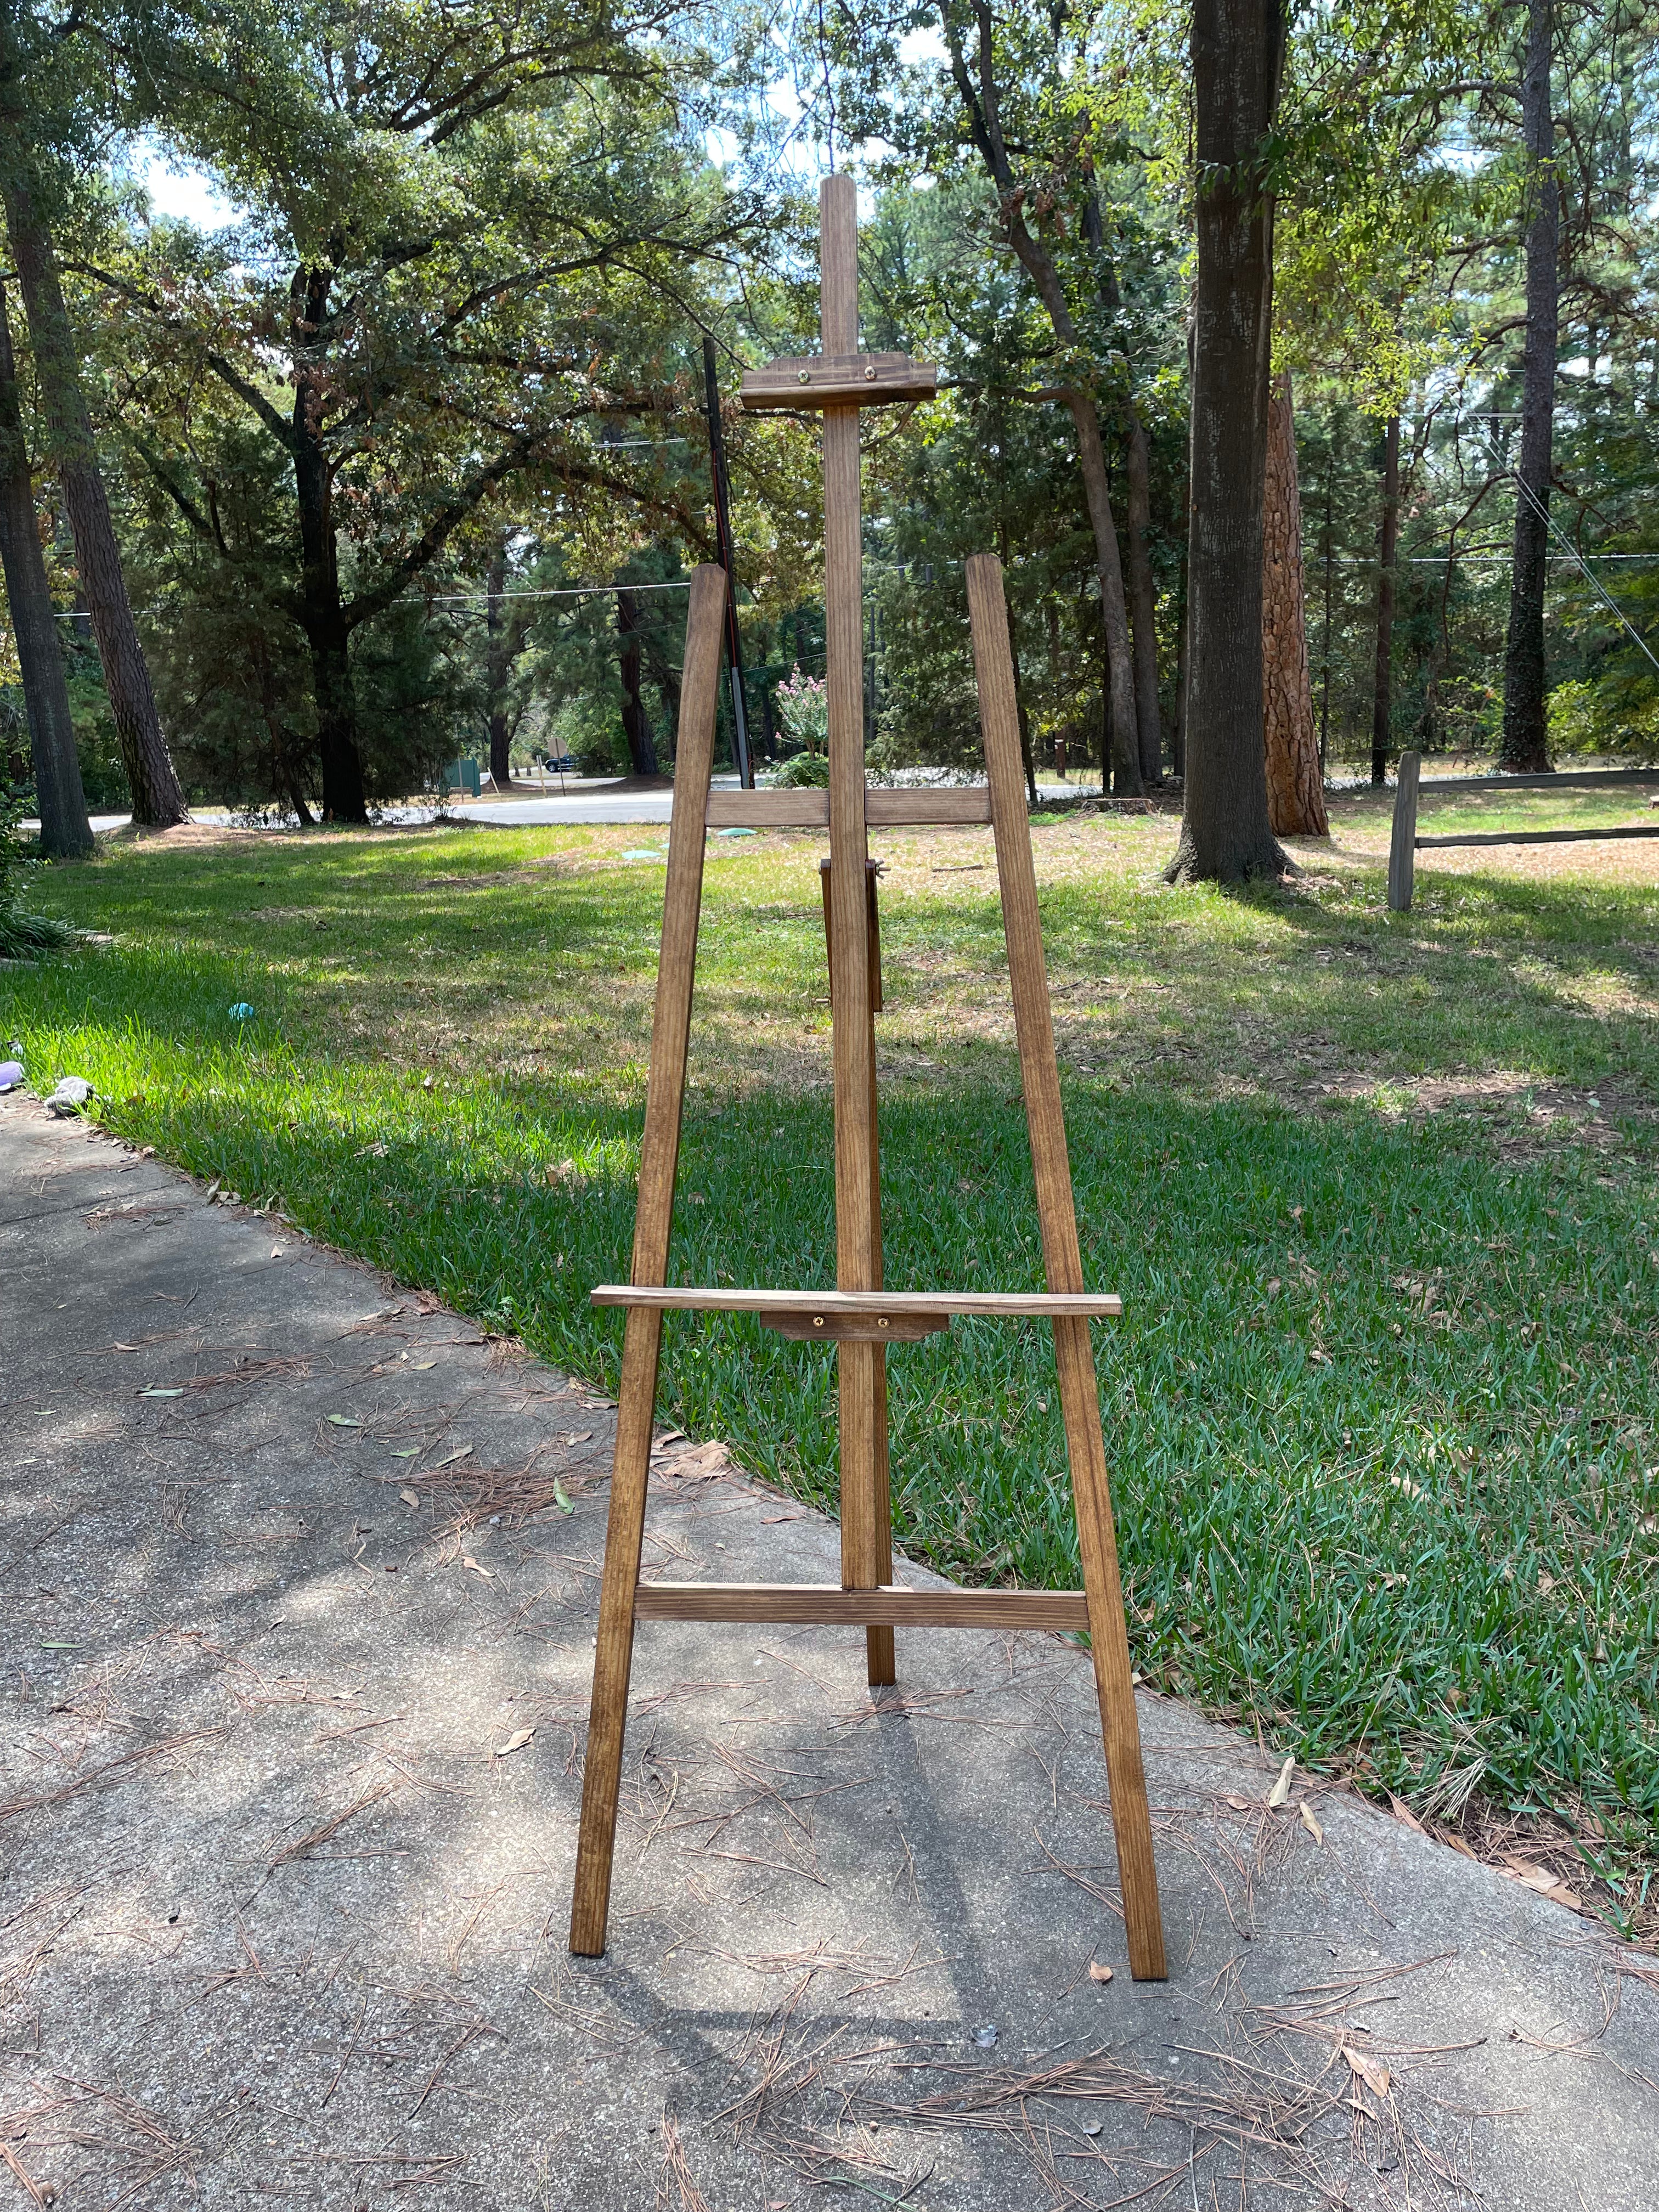 Wedding Easel Stand for Signs, Stand for Wedding Pictures, Wood Floor Easel for Art, Wedding Sign Stand Up to 9lbs Up to 30 x 40 inches Sign